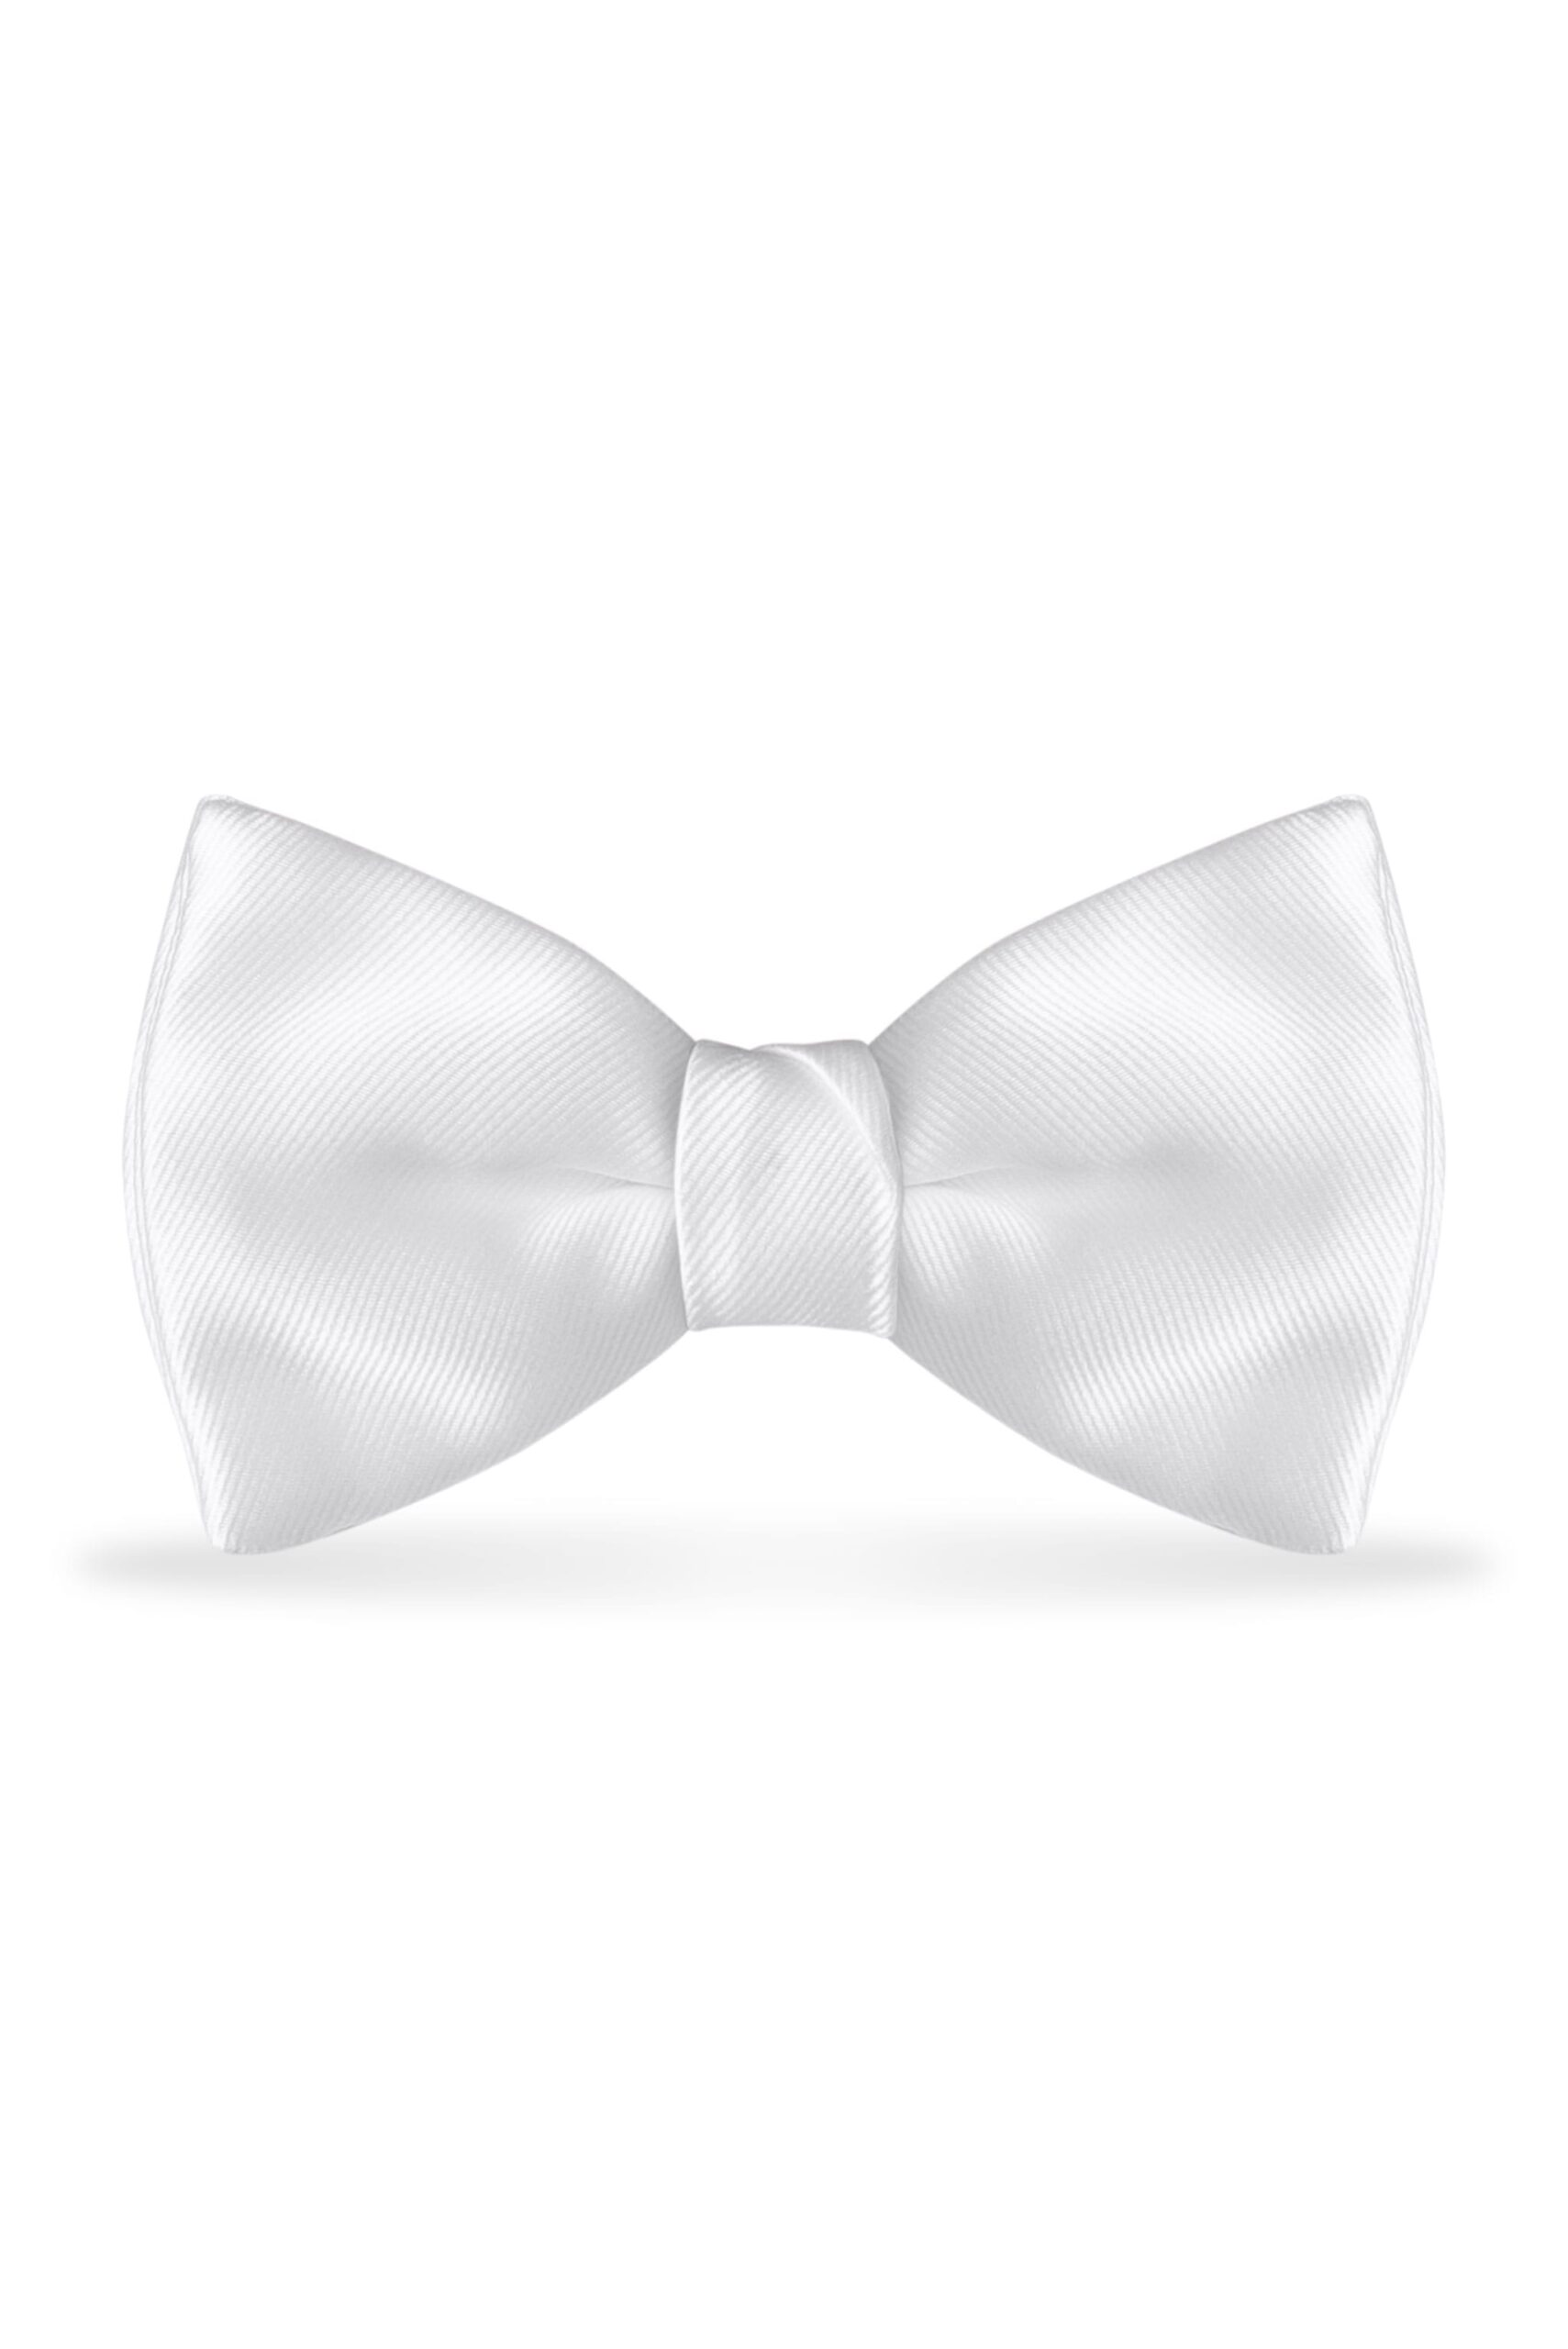 Solid White Bow Tie 1